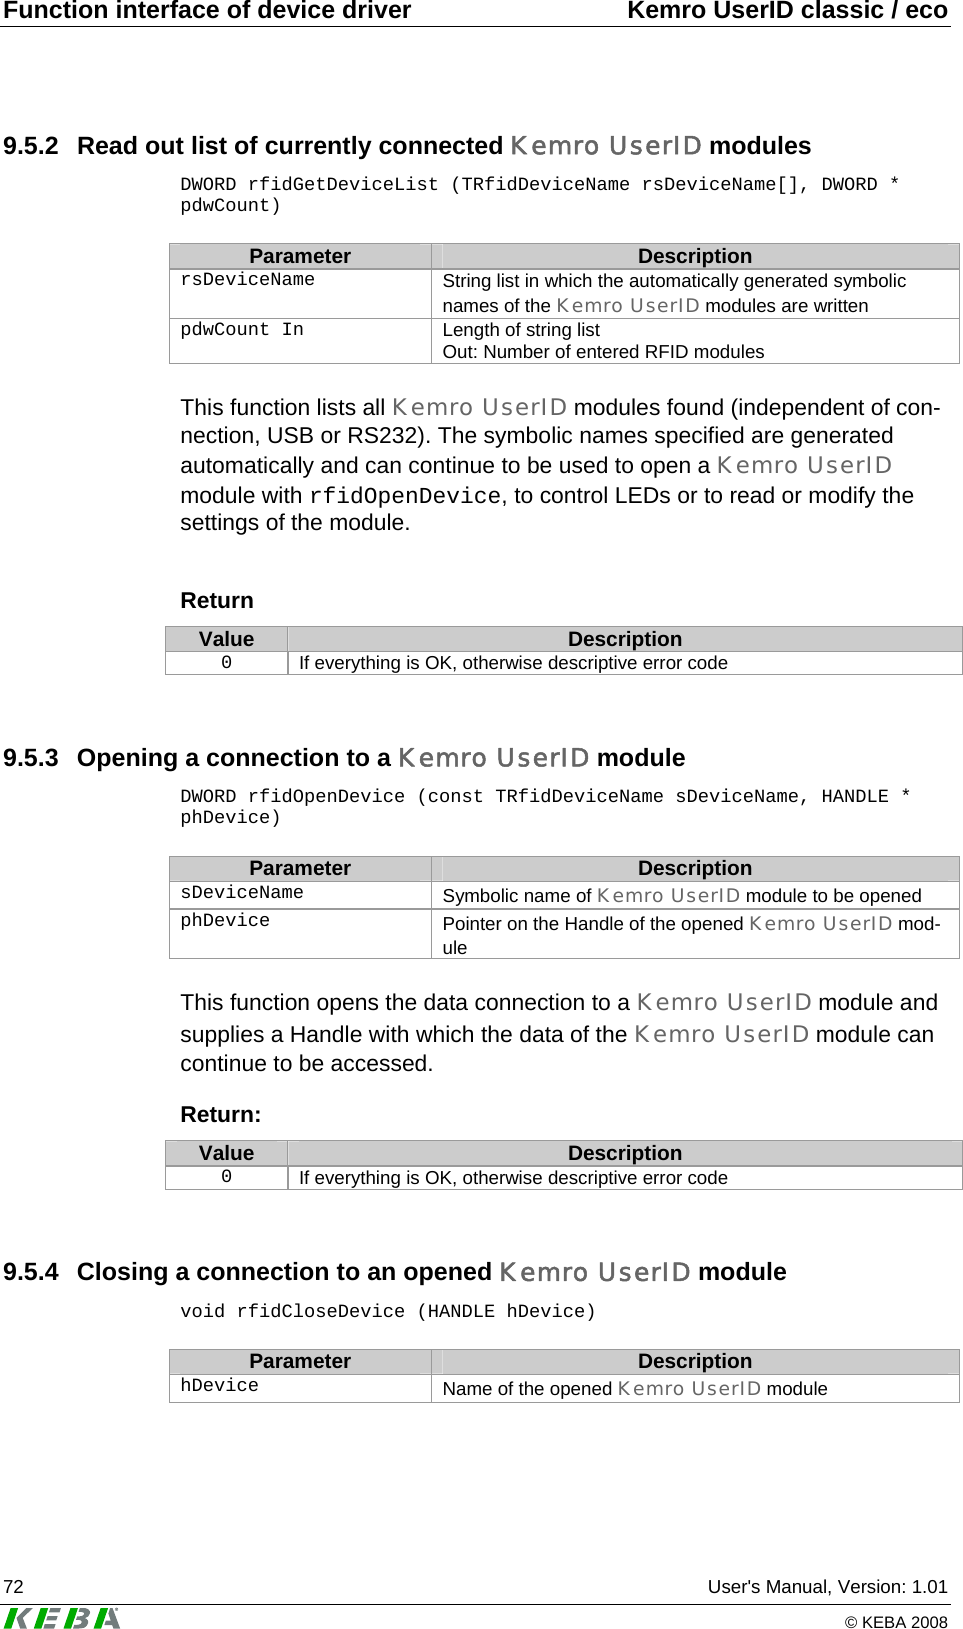 Function interface of device driver  Kemro UserID classic / eco 72  User&apos;s Manual, Version: 1.01   © KEBA 2008 9.5.2  Read out list of currently connected Kemro UserID modules DWORD rfidGetDeviceList (TRfidDeviceName rsDeviceName[], DWORD * pdwCount)  Parameter  Description rsDeviceName  String list in which the automatically generated symbolic names of the Kemro UserID modules are written pdwCount In  Length of string list  Out: Number of entered RFID modules  This function lists all Kemro UserID modules found (independent of con-nection, USB or RS232). The symbolic names specified are generated automatically and can continue to be used to open a Kemro UserID module with rfidOpenDevice, to control LEDs or to read or modify the settings of the module.   Return Value  Description 0  If everything is OK, otherwise descriptive error code  9.5.3  Opening a connection to a Kemro UserID module DWORD rfidOpenDevice (const TRfidDeviceName sDeviceName, HANDLE * phDevice)  Parameter  Description sDeviceName  Symbolic name of Kemro UserID module to be opened phDevice  Pointer on the Handle of the opened Kemro UserID mod-ule  This function opens the data connection to a Kemro UserID module and supplies a Handle with which the data of the Kemro UserID module can continue to be accessed.  Return: Value  Description 0  If everything is OK, otherwise descriptive error code  9.5.4  Closing a connection to an opened Kemro UserID module void rfidCloseDevice (HANDLE hDevice)  Parameter  Description hDevice   Name of the opened Kemro UserID module  